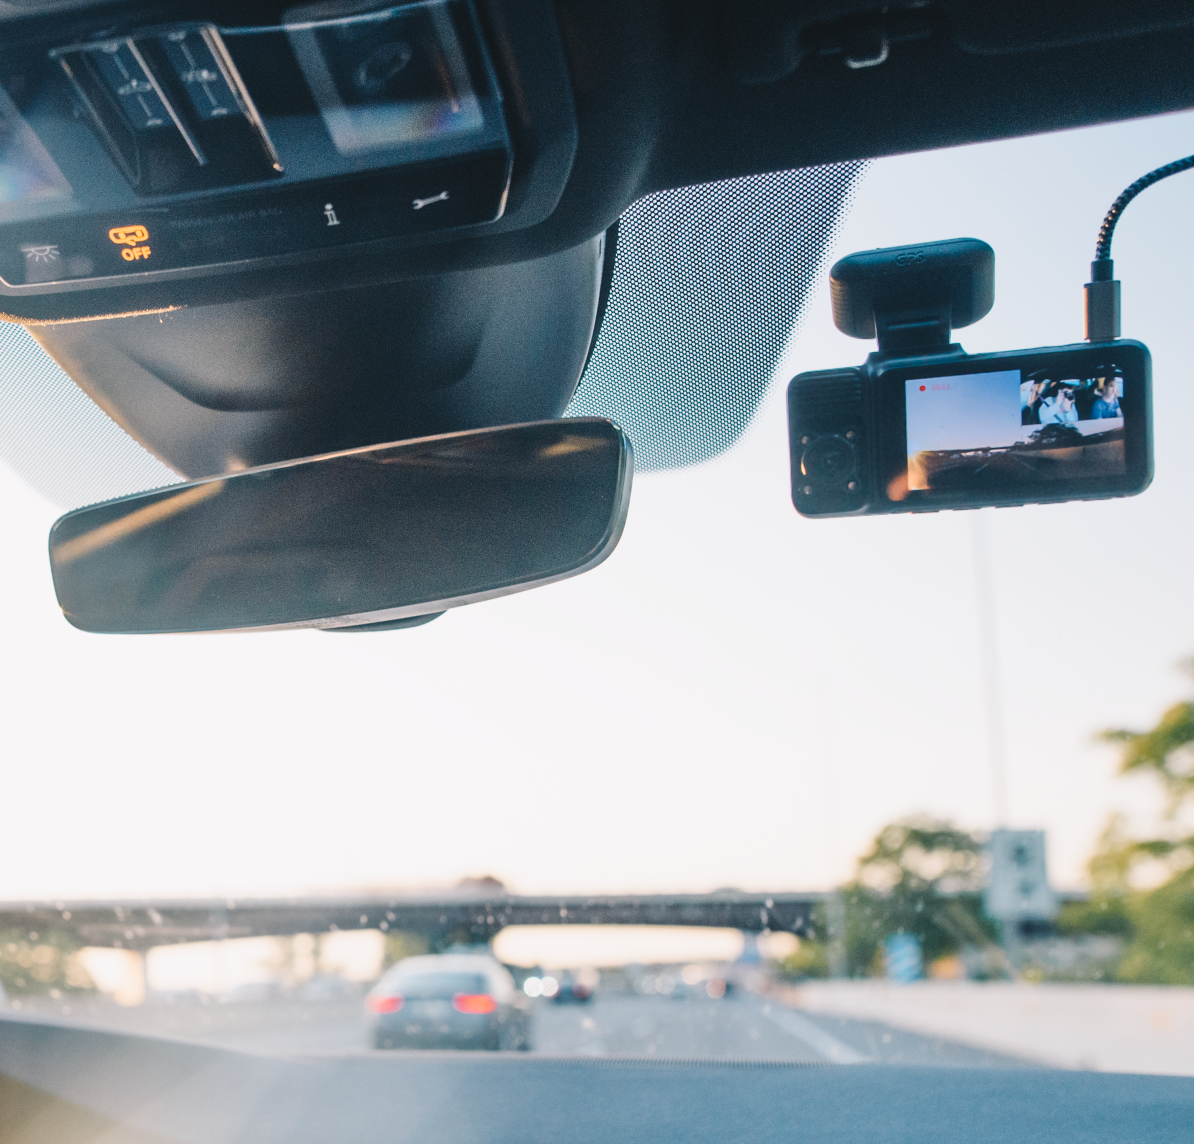 The Benefits of Using a 3-Channel Dash Cam As Car Security Camera